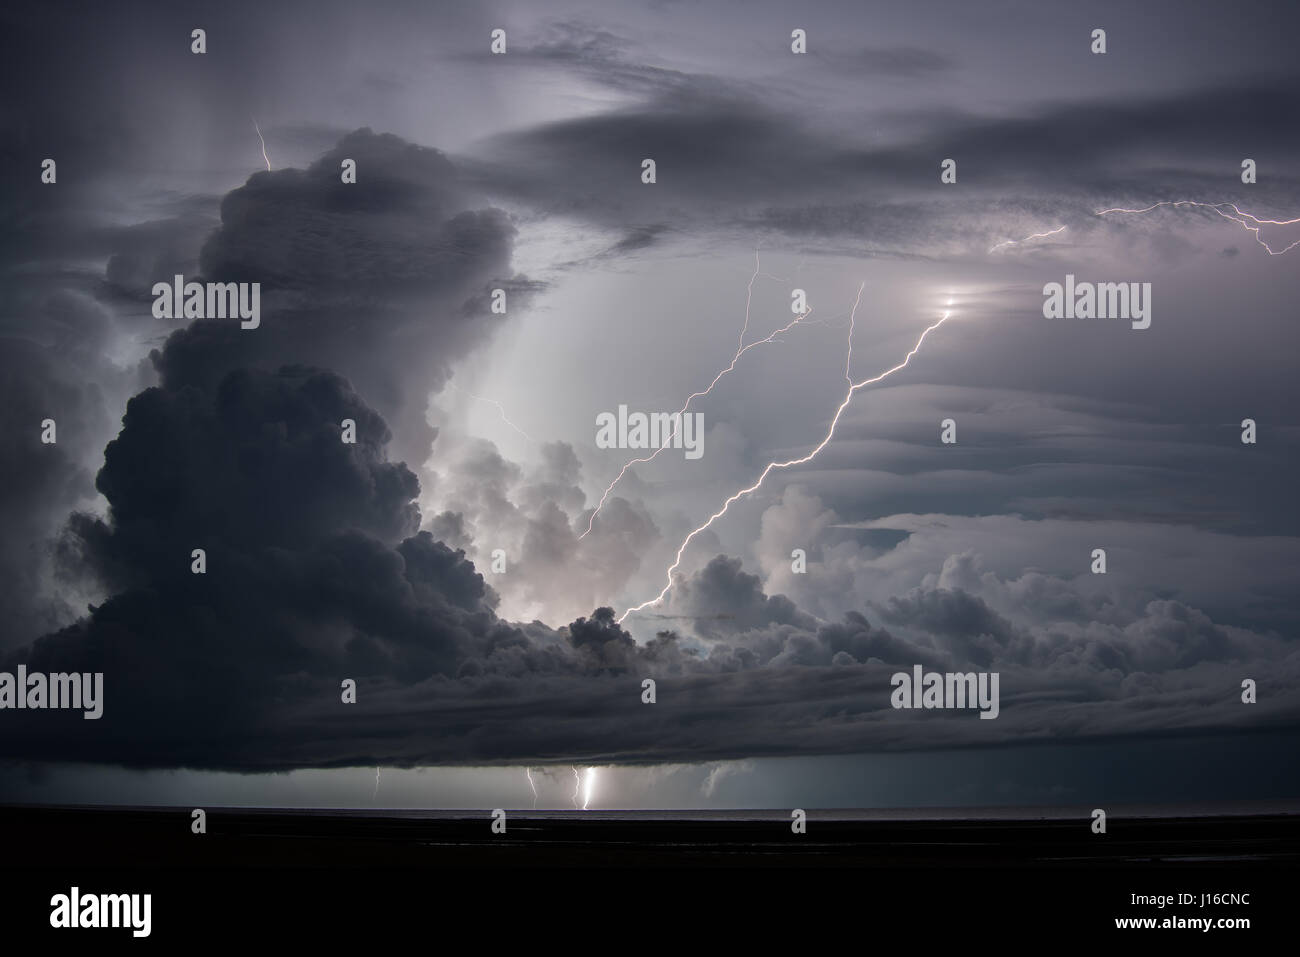 JAIBIRU, AUSTRALIA: AN OFF-DUTY emergency services officer managed to capture the hair-raising moment lightning shot UPWARDS into the sky before falling back to earth. You would be forgiven for thinking that lightning only strikes downwards from the clouds, but as this extraordinary picture proves bolts of electricity can travel upwards as-well-as downwards. Other pictures by Australian emergency services officer Scott H. Murray show the difference between this rare lighting strike and conventional yet still awe-inspiring lightning storms the country experiences each year from March to May. Stock Photo